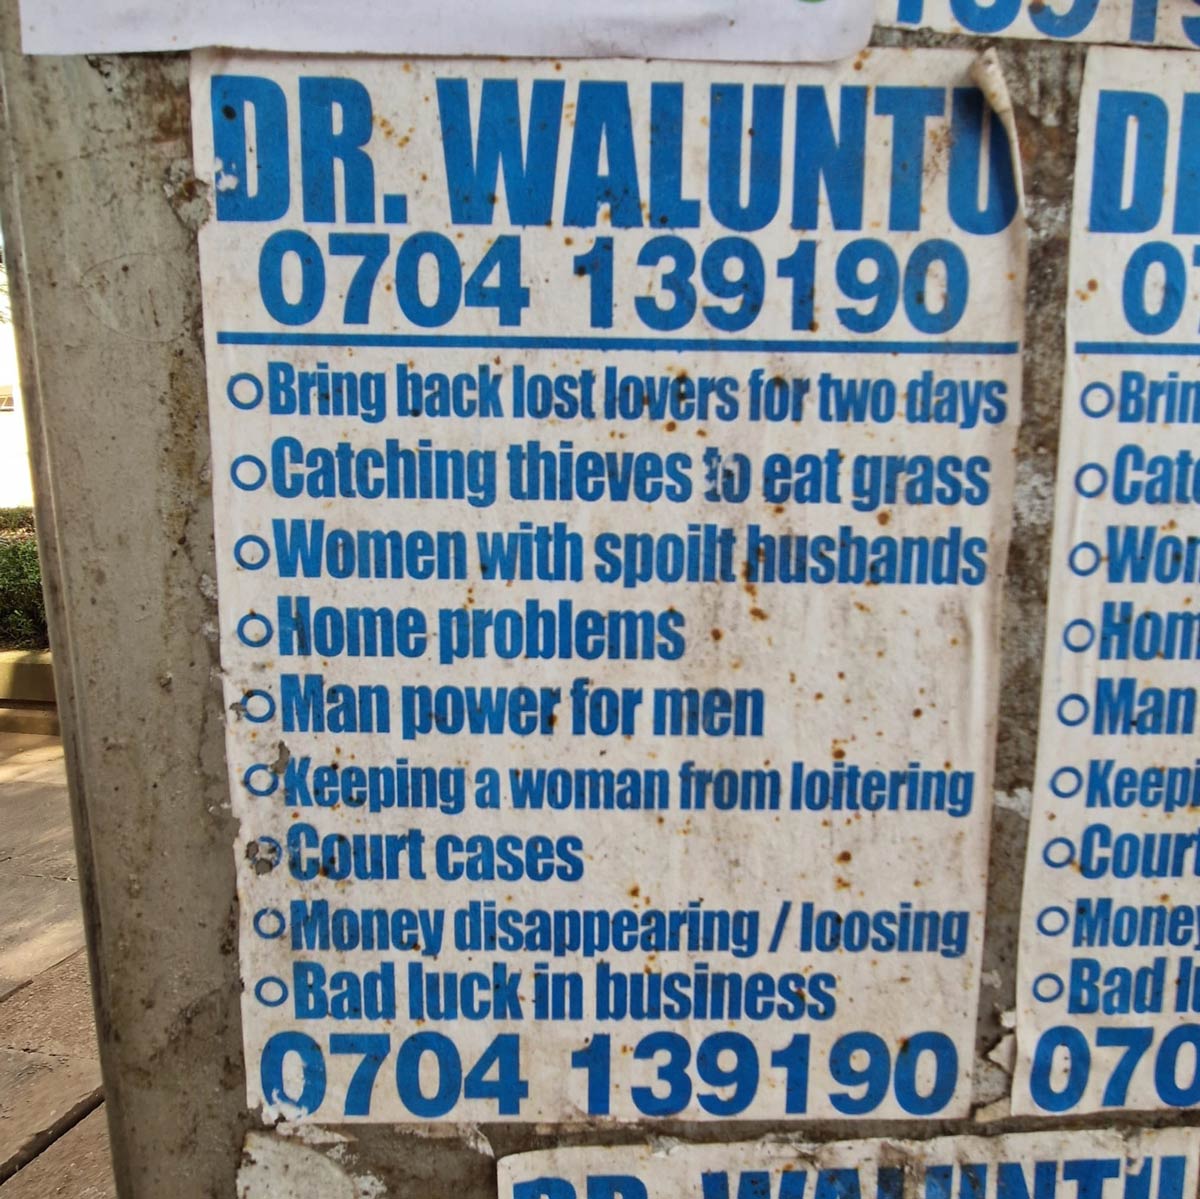 My friend is traveling in Ghana and saw this